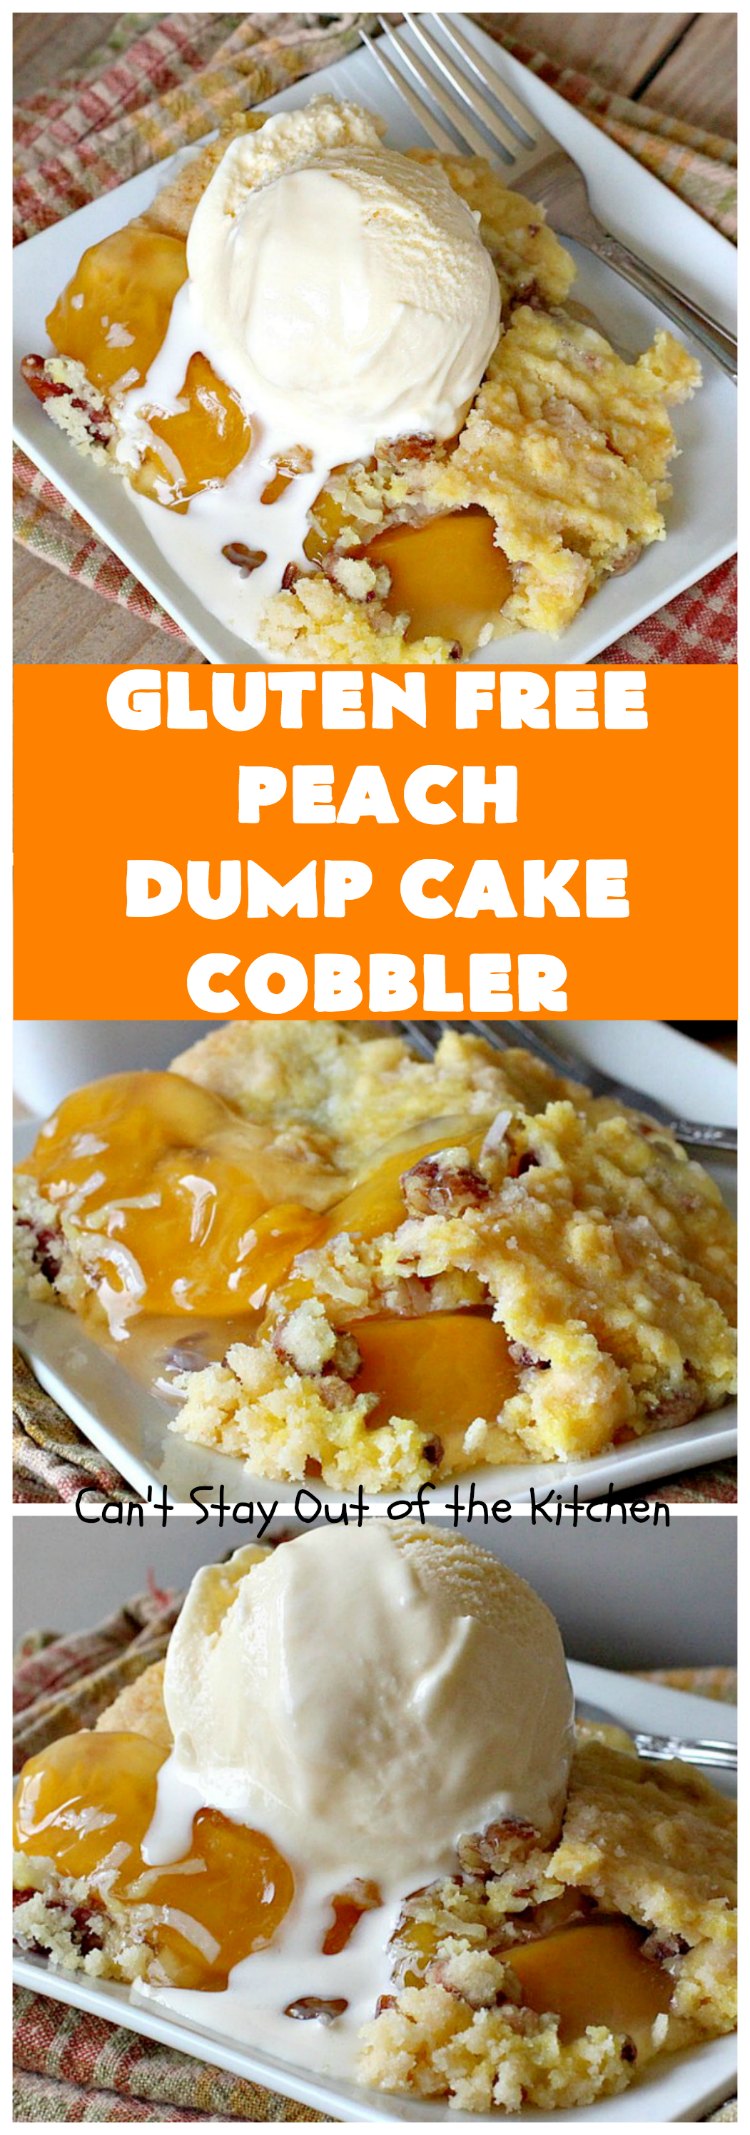 Gluten Free Peach Dump Cake Cobbler | Can't Stay Out of the Kitchen